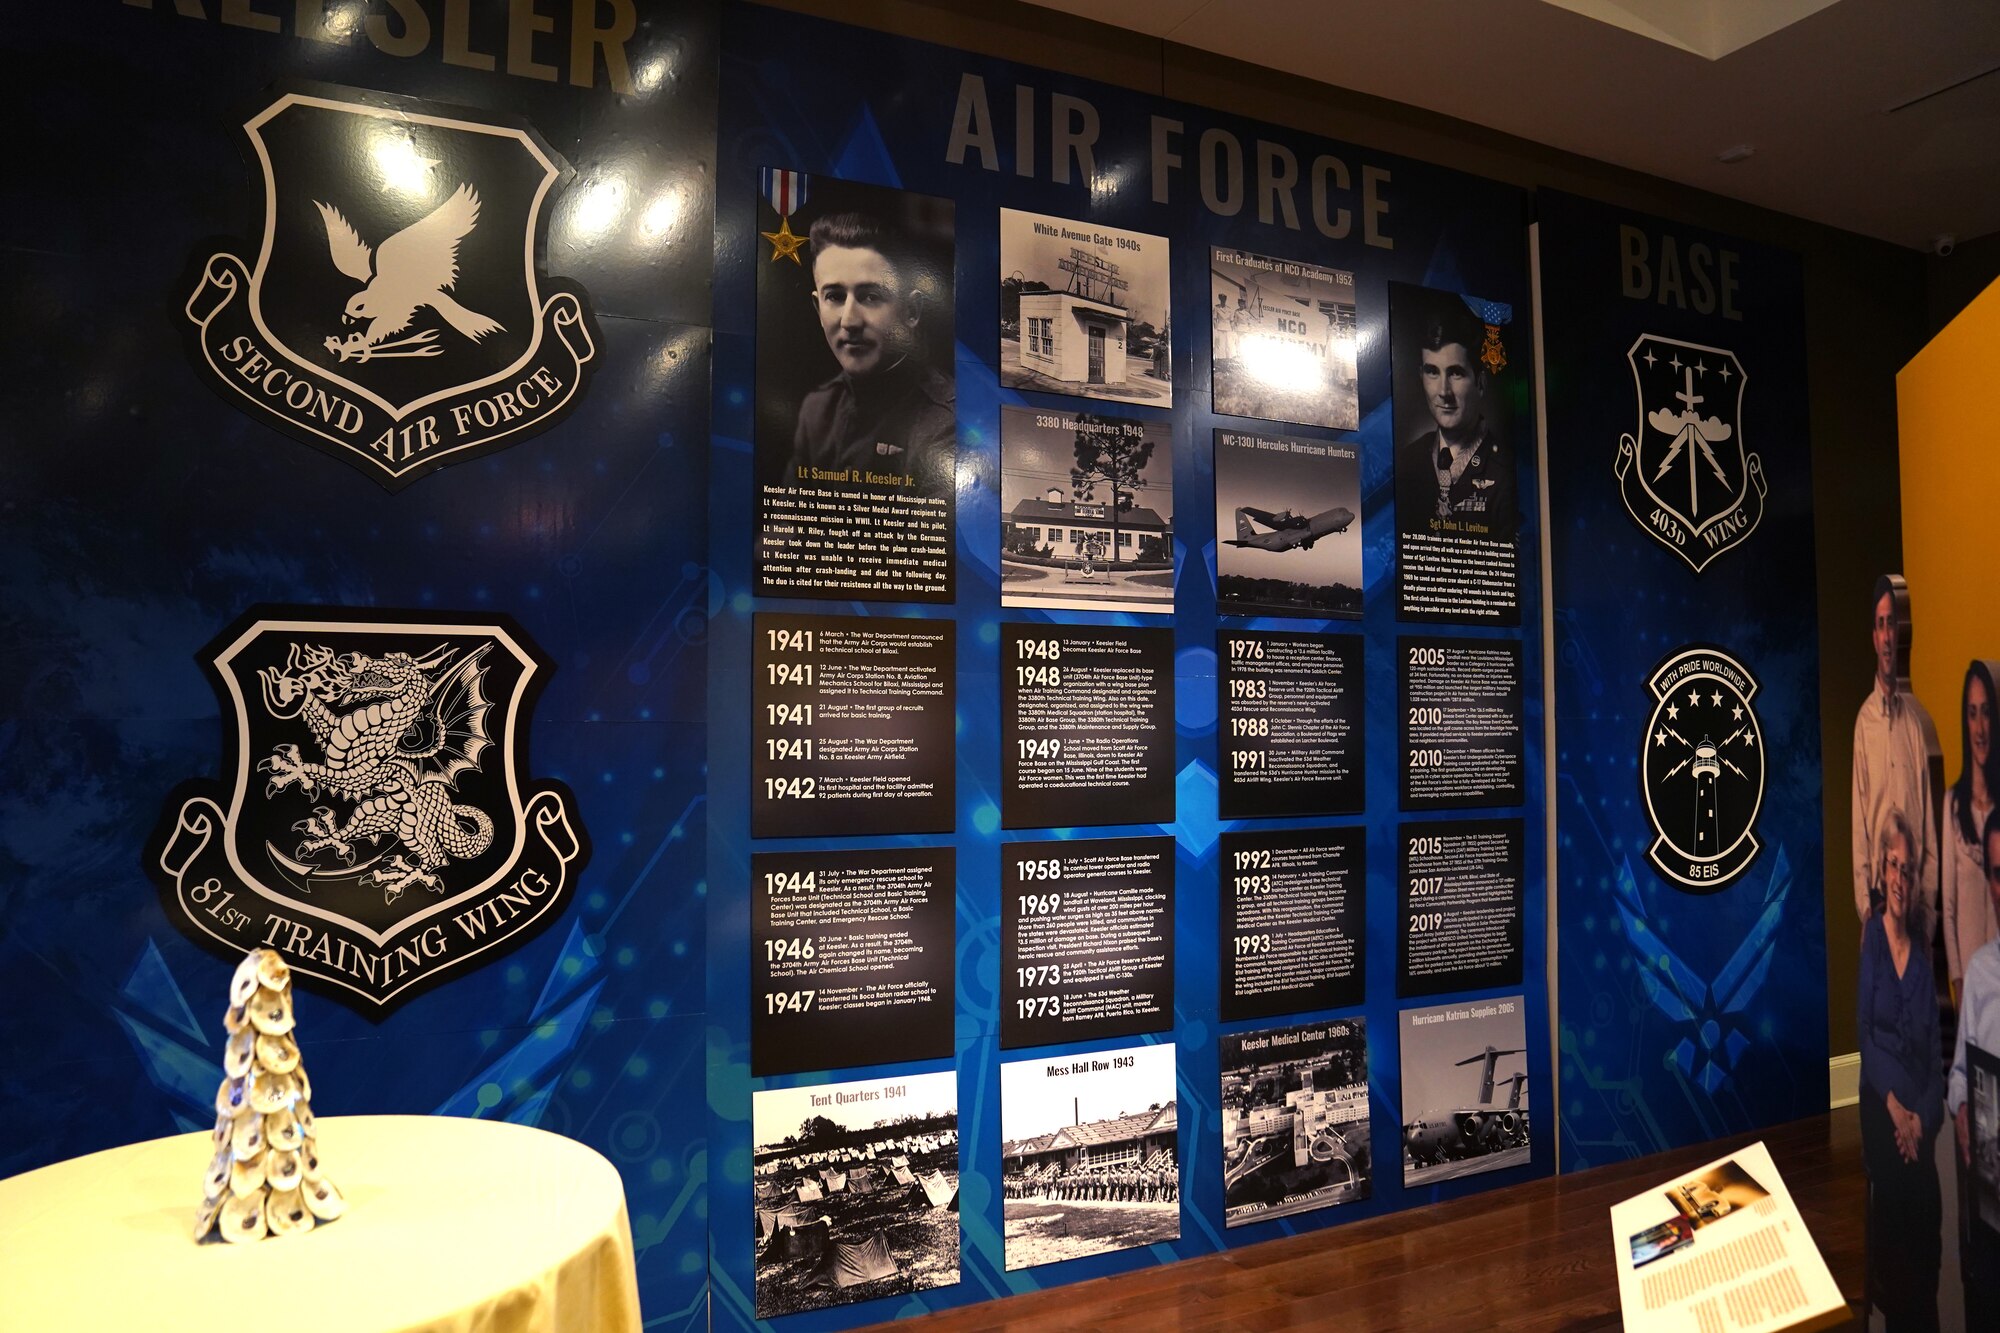 A Keesler Air Force Base display is shown inside the Biloxi Visitor's Center in Biloxi, Mississippi, Jan. 6, 2020. A ceremony was held to unveil the new display, which was created to show the history of Keesler and its role in the city of Biloxi. (U.S. Air Force photo by Airman 1st Class Seth Haddix)